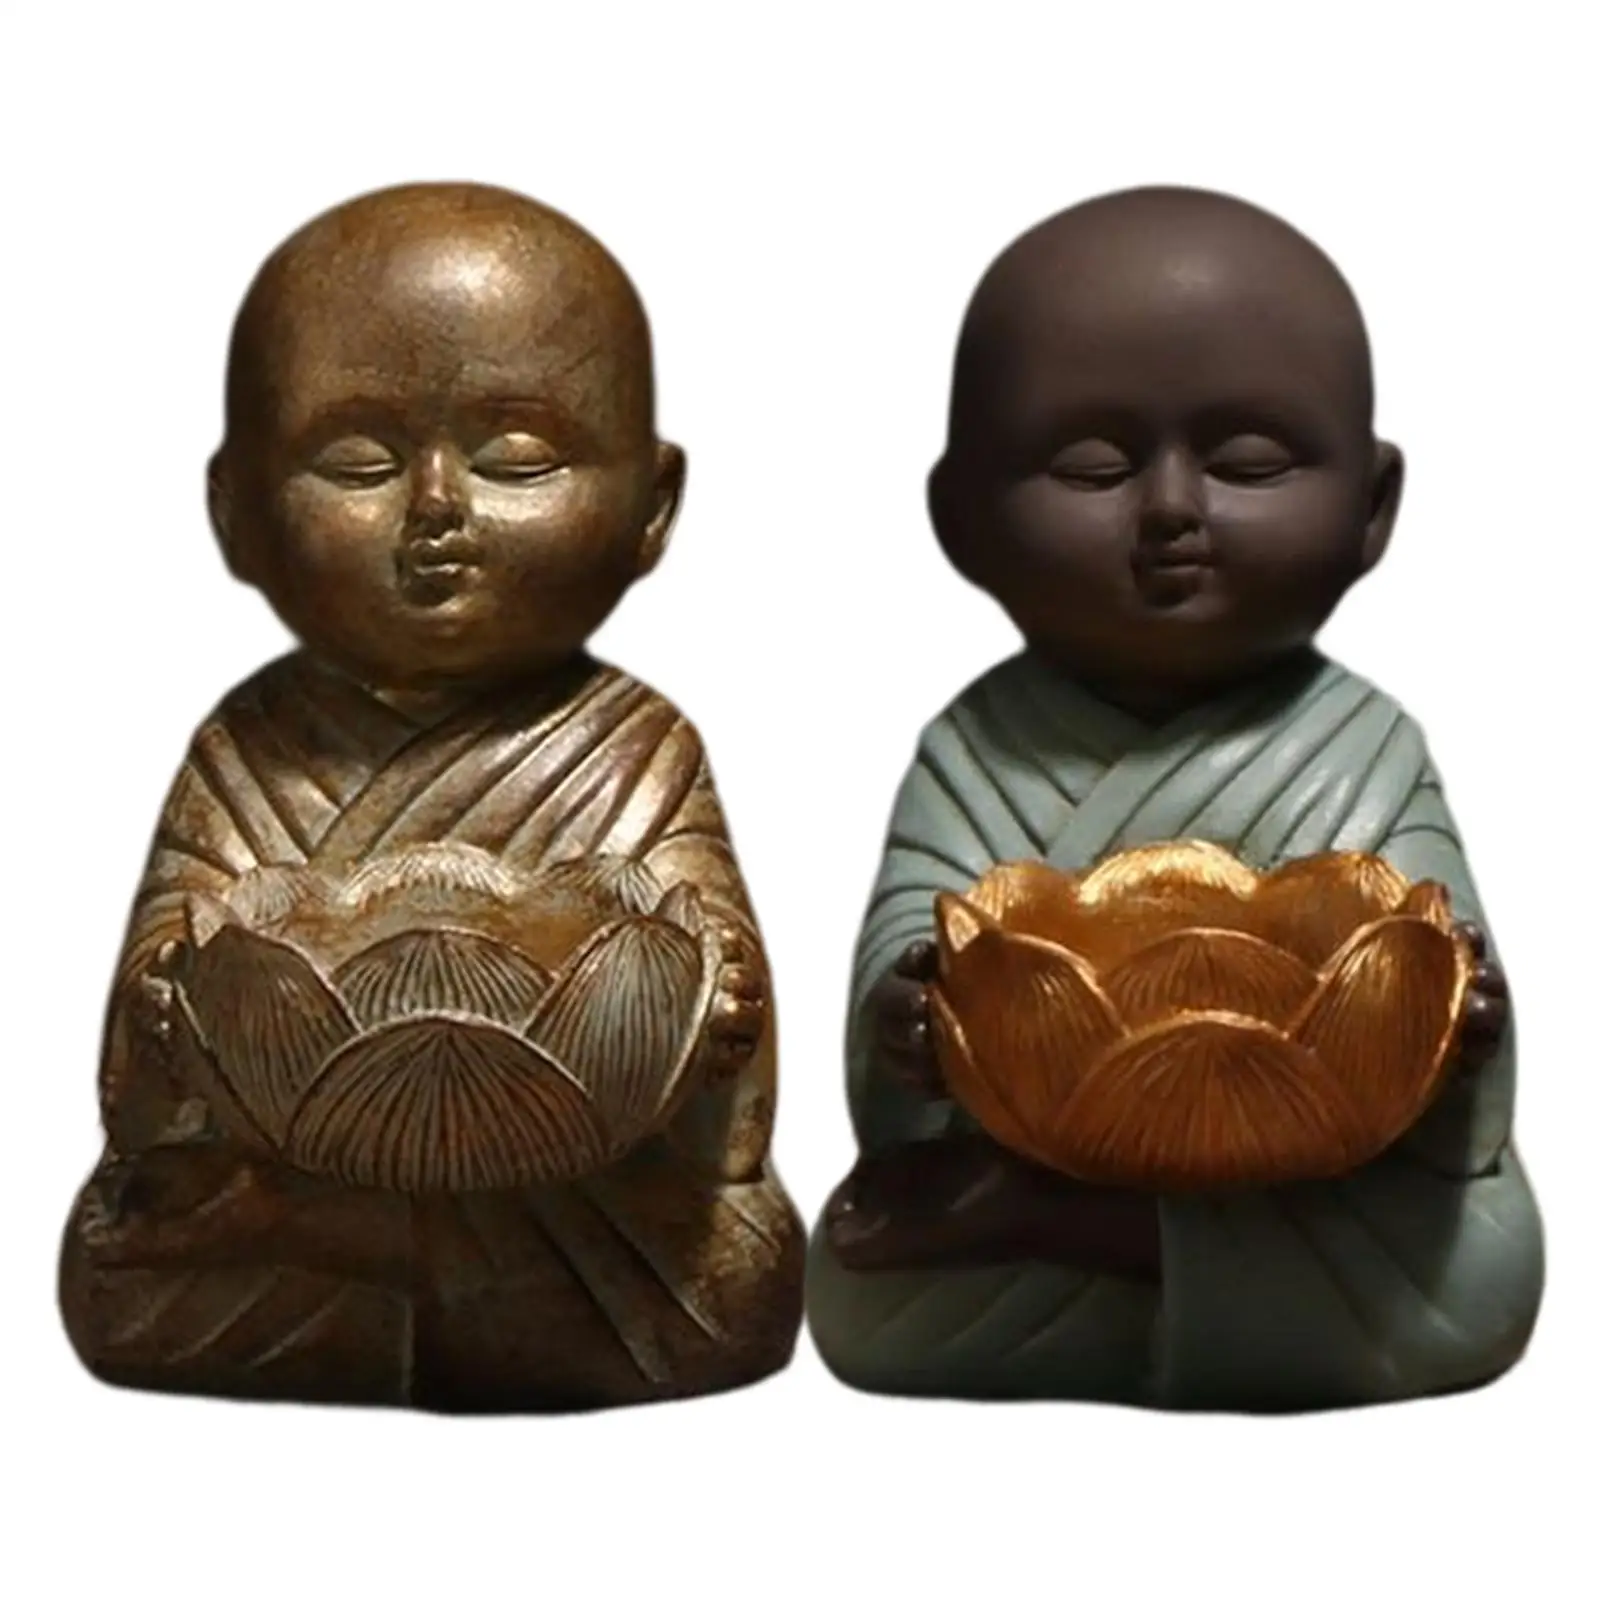 Small Meditating Little Monk Buddha Statue Tealight Candle Holder Antique Thai Monk Figurines Ornaments for Home Tabletop Hotel